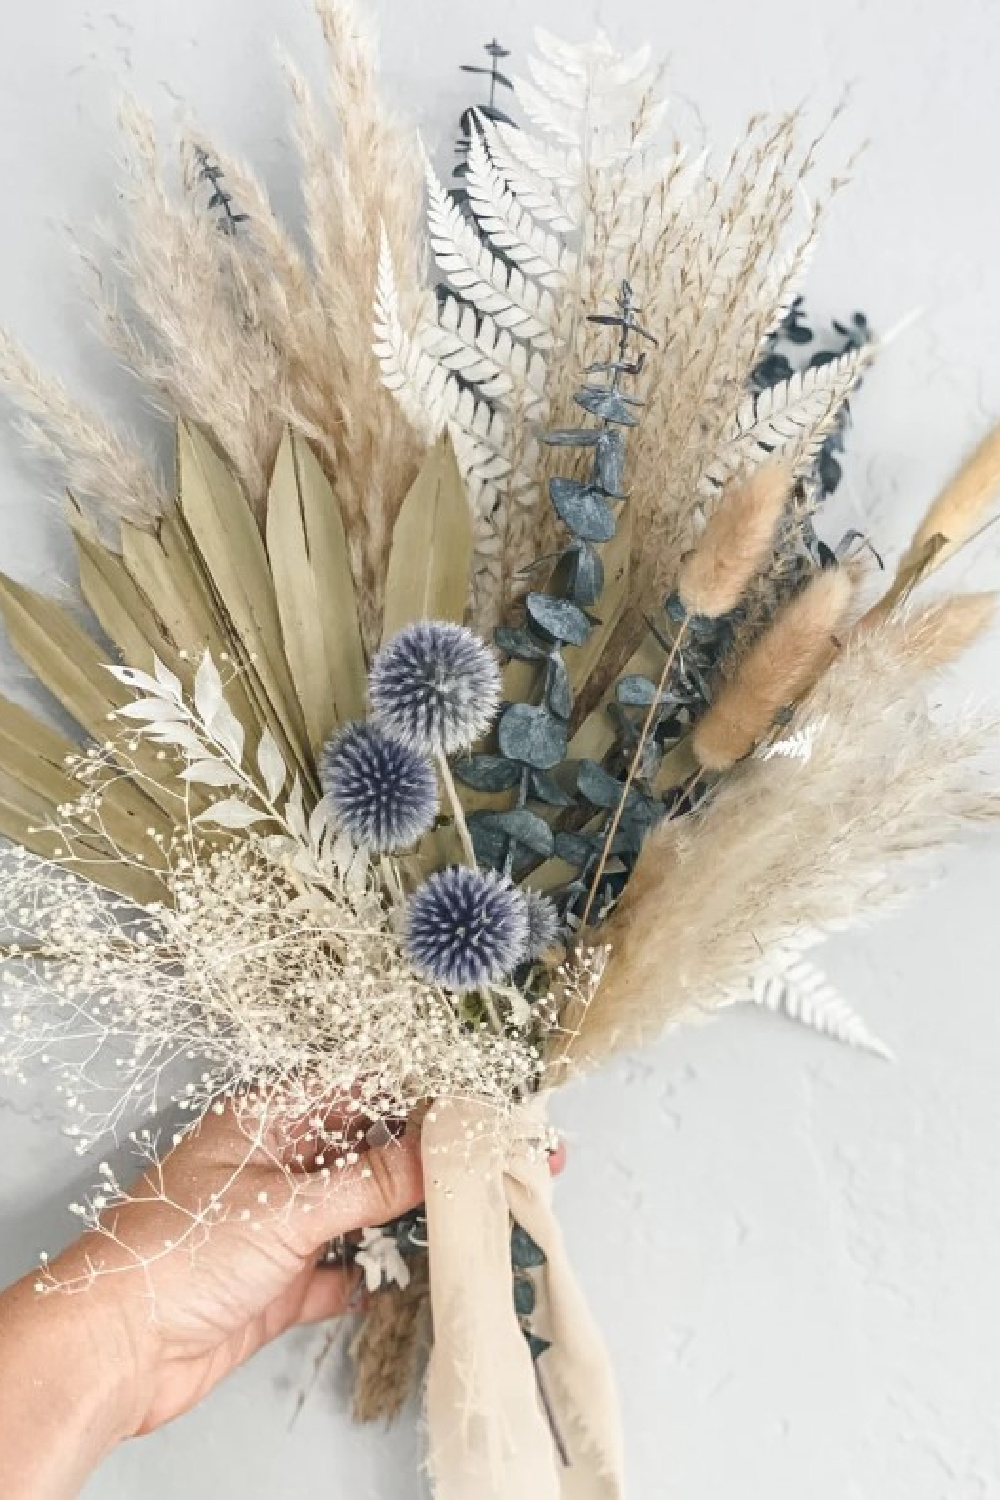 Dried fall floral bouquet with pampas grass and eucalyptus - Fernandsunpalm on Etsy. #driedflorals #fallbouquet